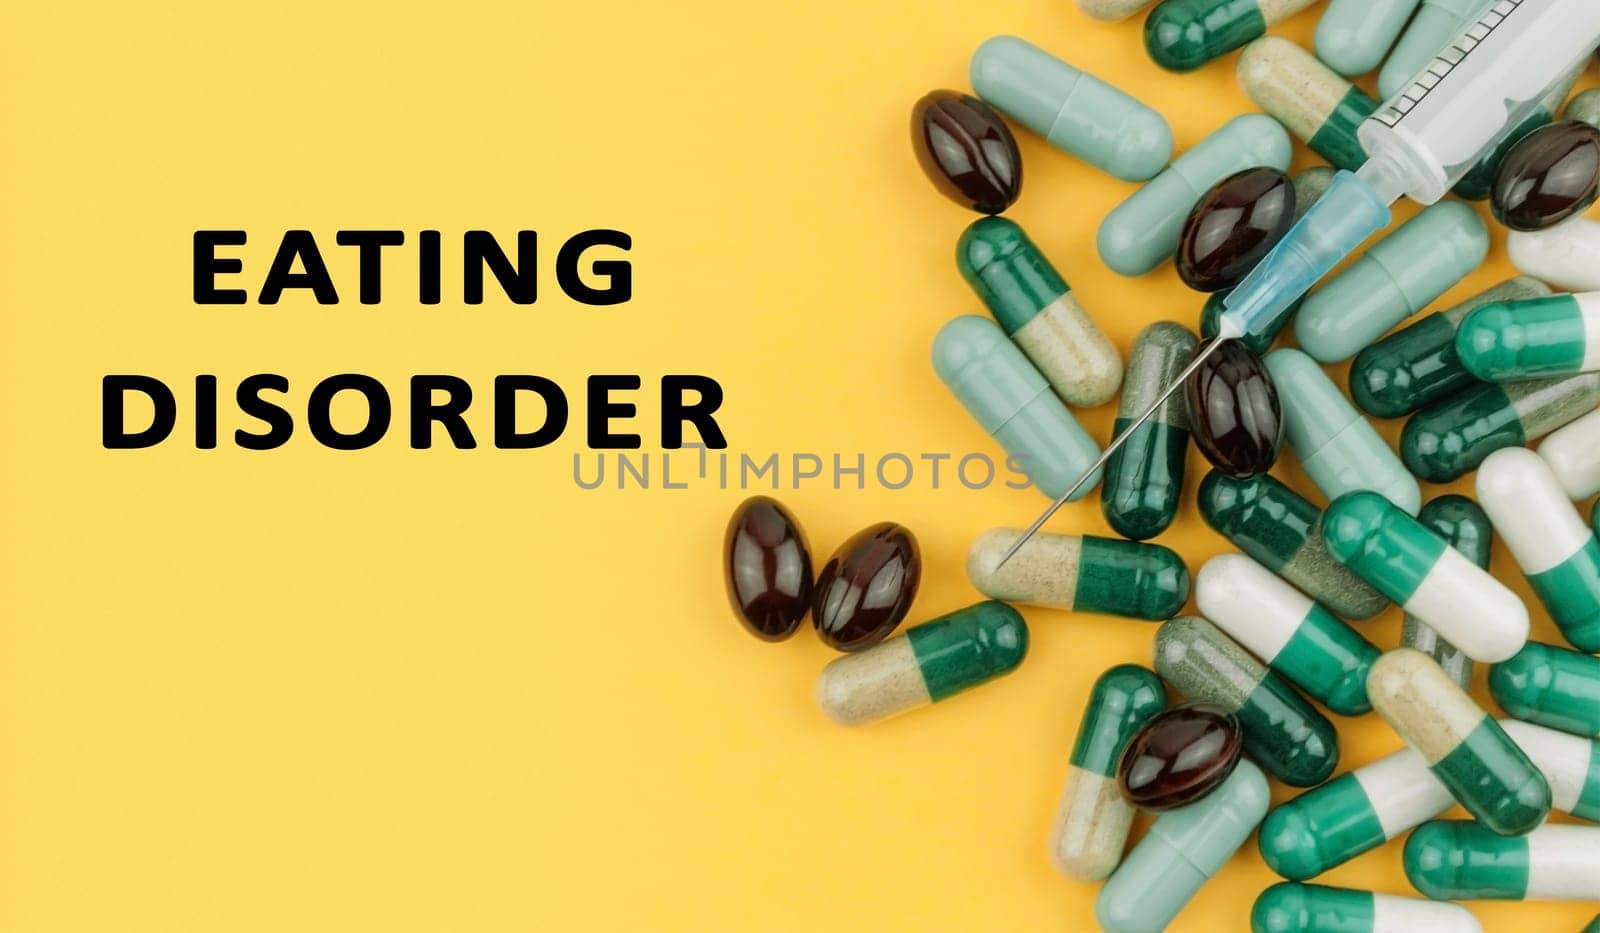 A bunch of pills with a syringe on top of them. The pills are green, white, and black. The image is titled Eating Disorder